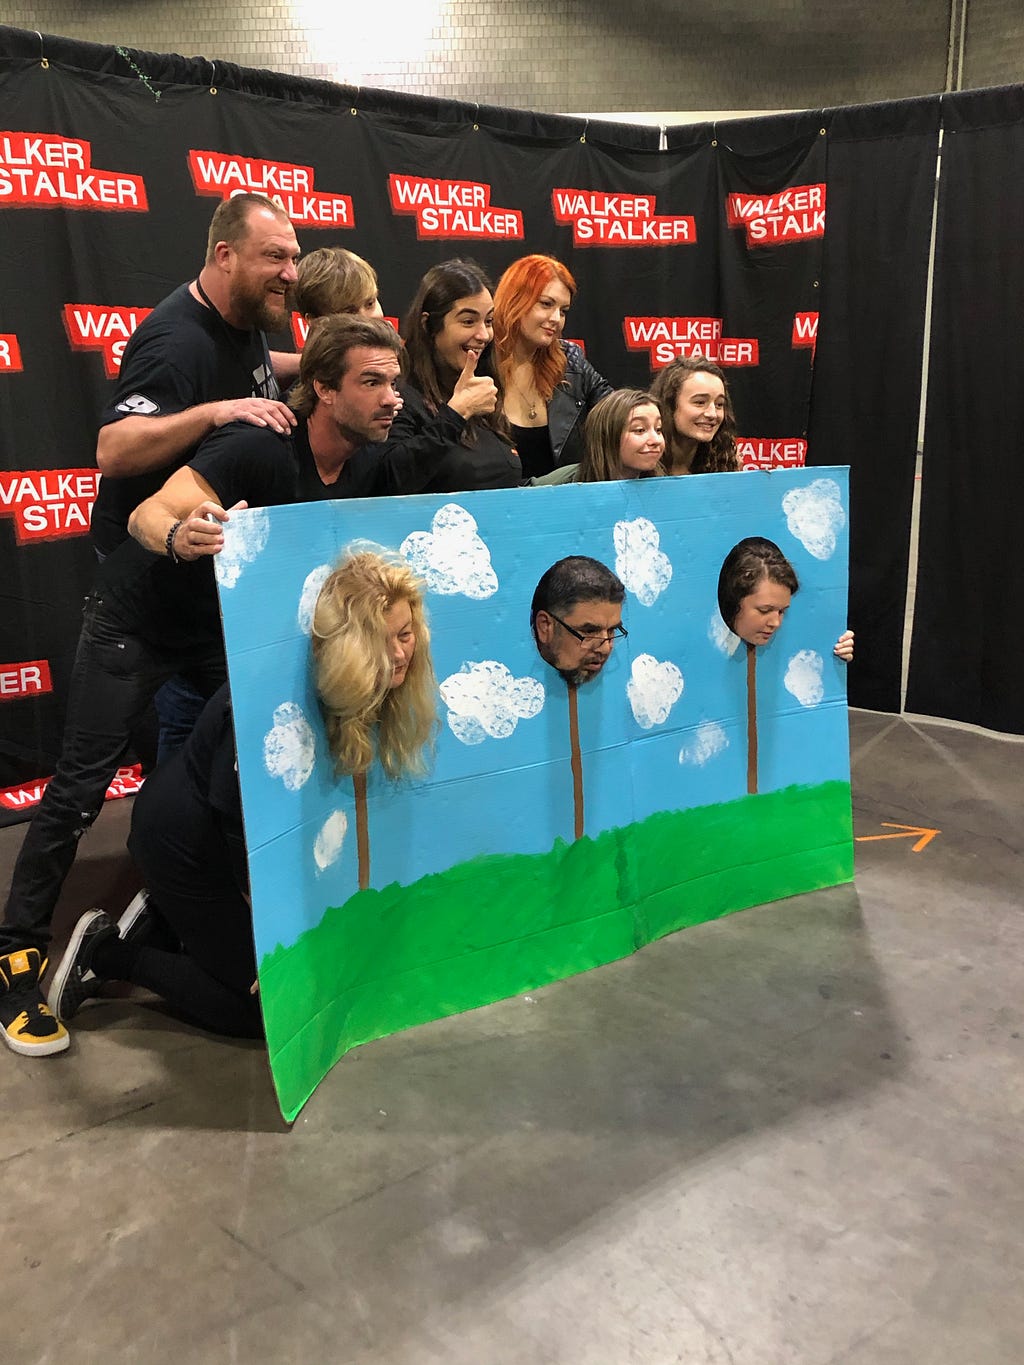 Fans pose for photos with actors from The Walking Dead